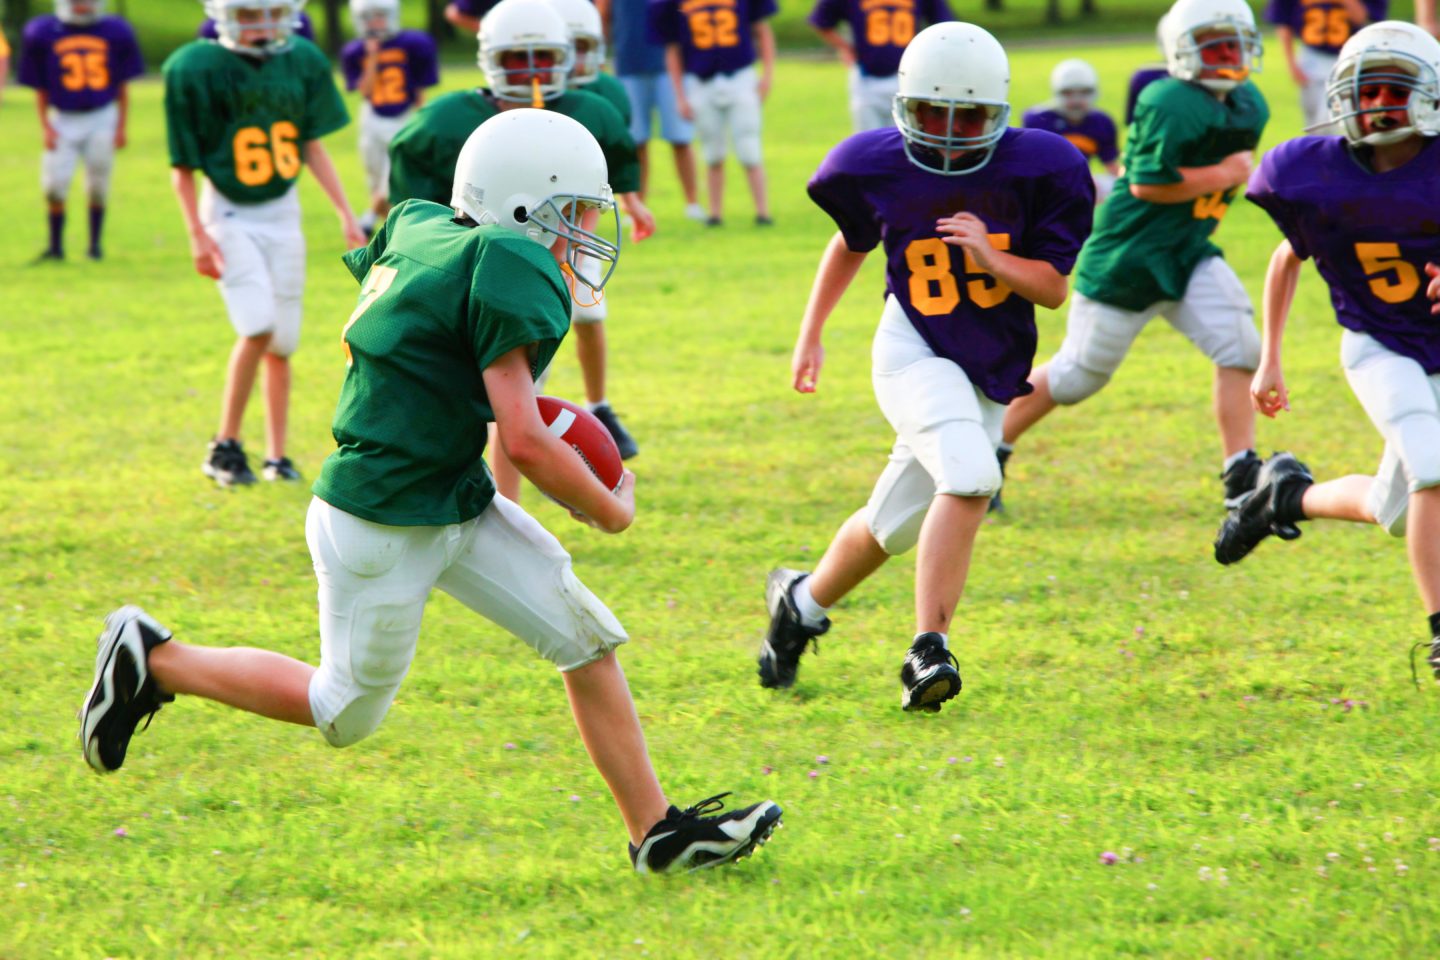 Football is not the only sport that can cause concussions (Brooks Rehabilitation)